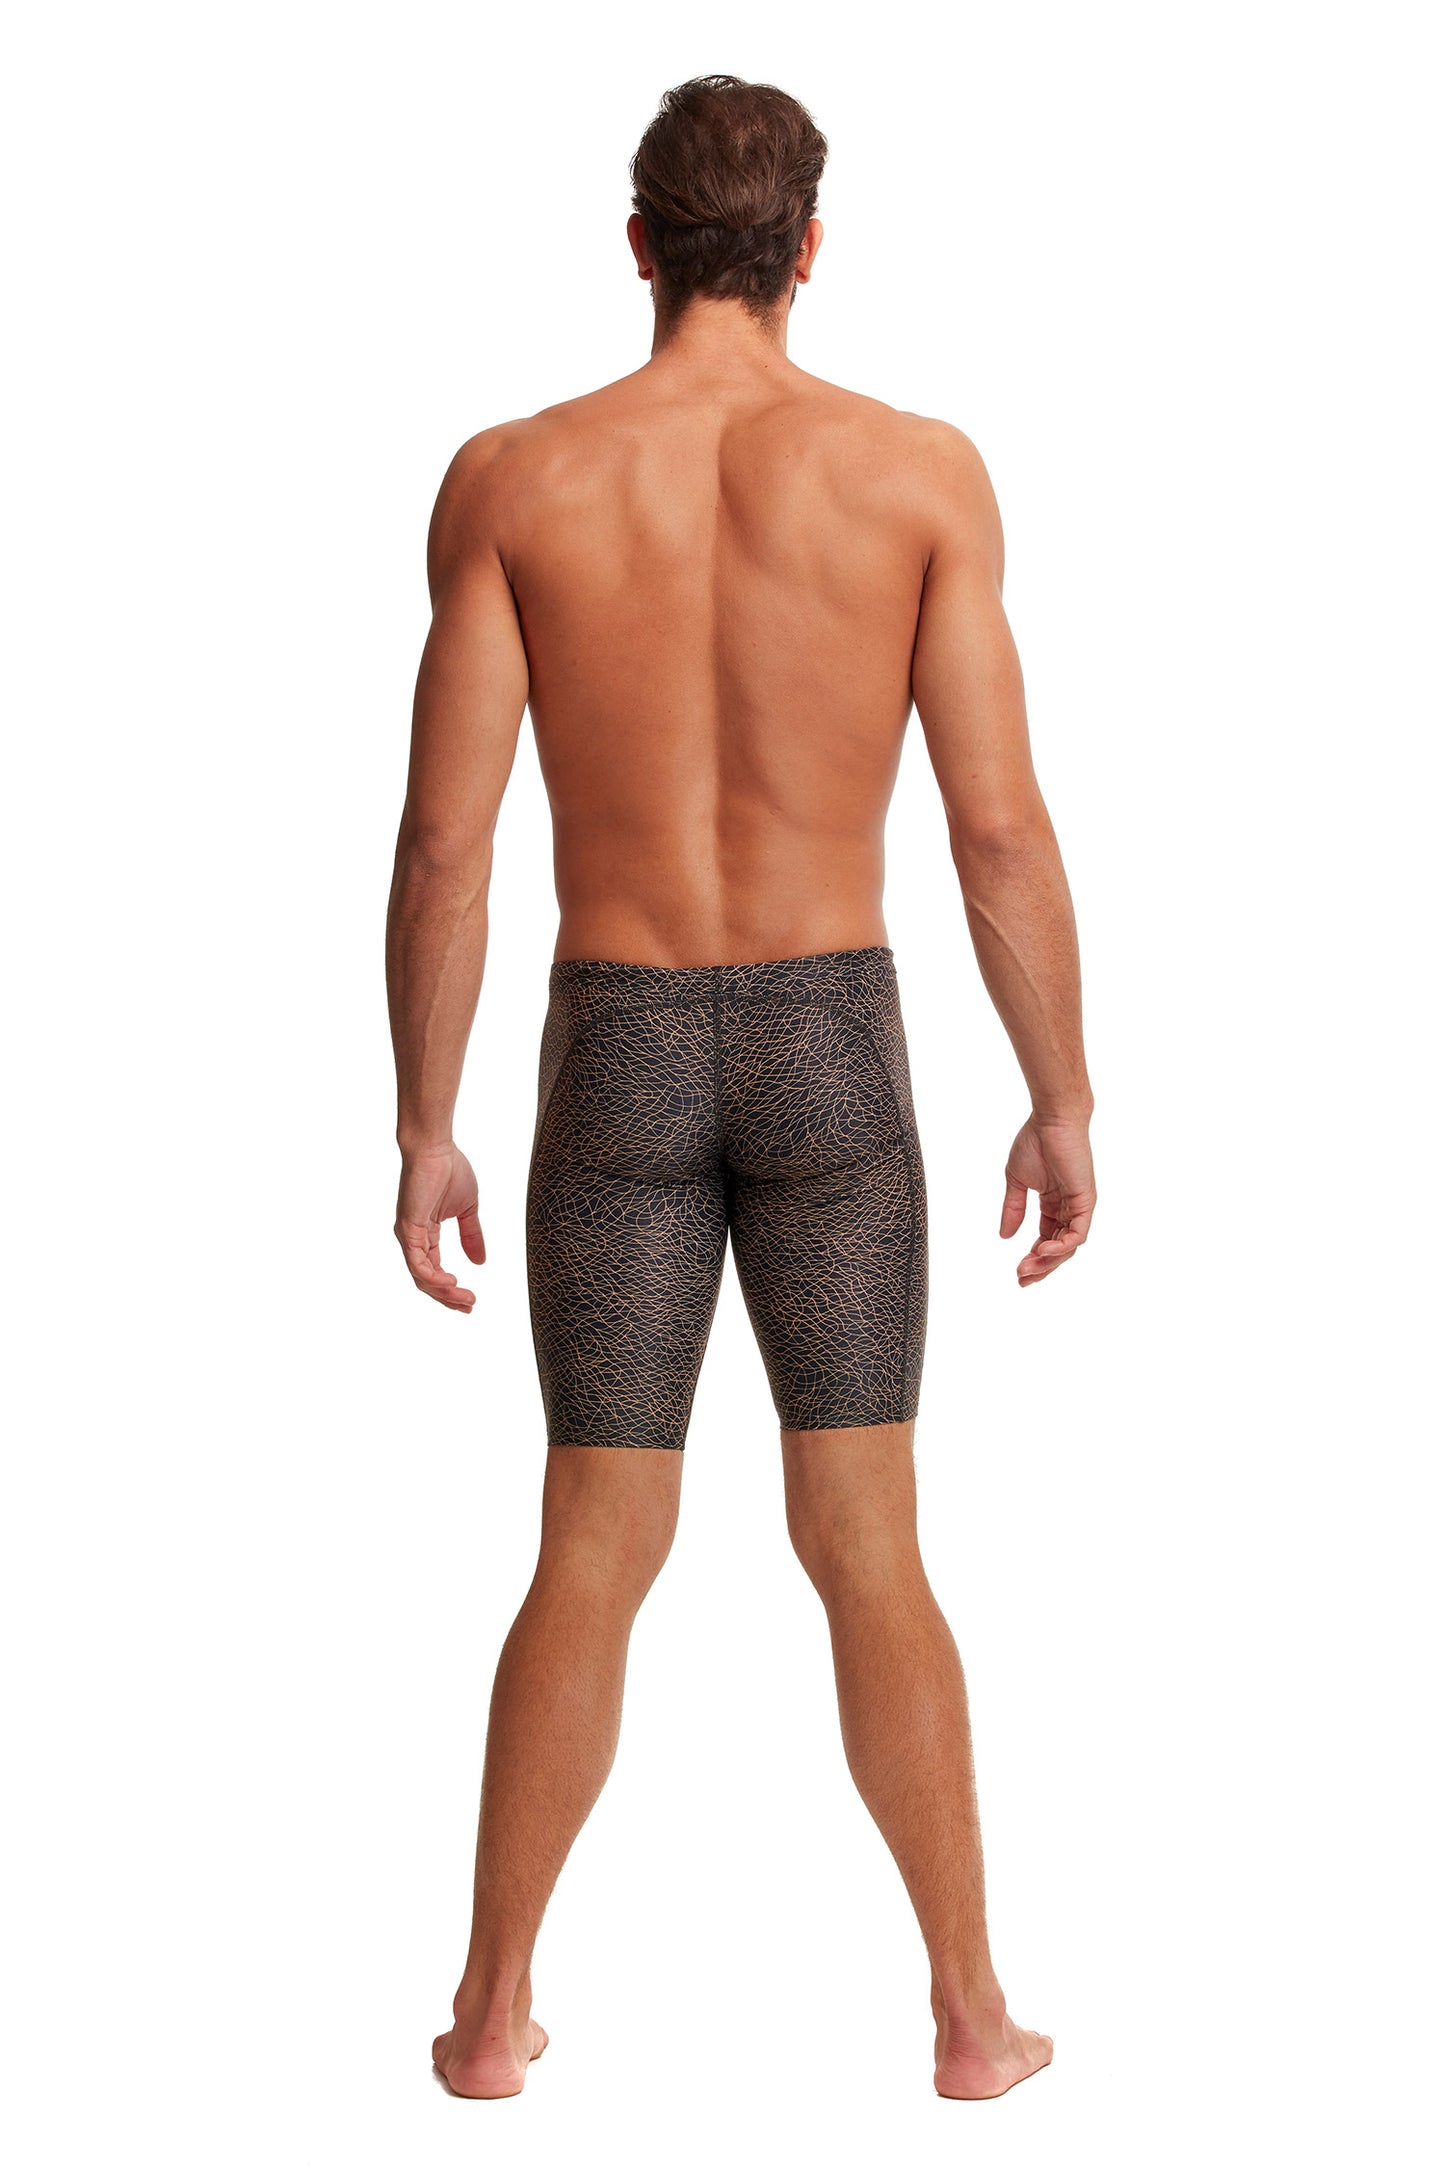 Funky Trunks Mens Training Jammers Leather Skin